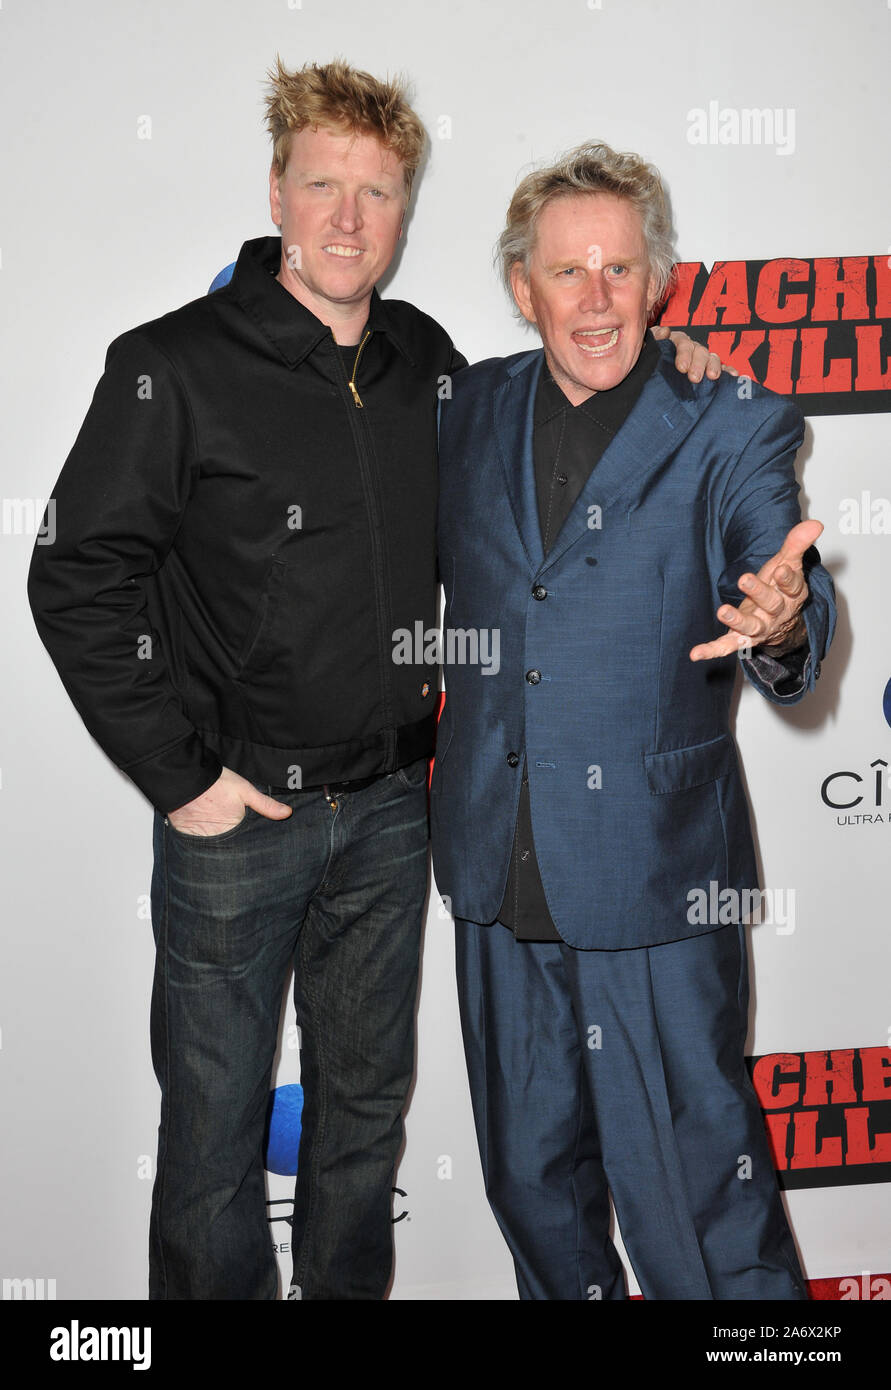 LOS ANGELES, CA. October 02, 2013: Gary Busey & son Jake Busey at the Los  Angeles premiere of "Machete Kills" at the Regal Cinemas LA Live. © 2013  Paul Smith / Featureflash Stock Photo - Alamy